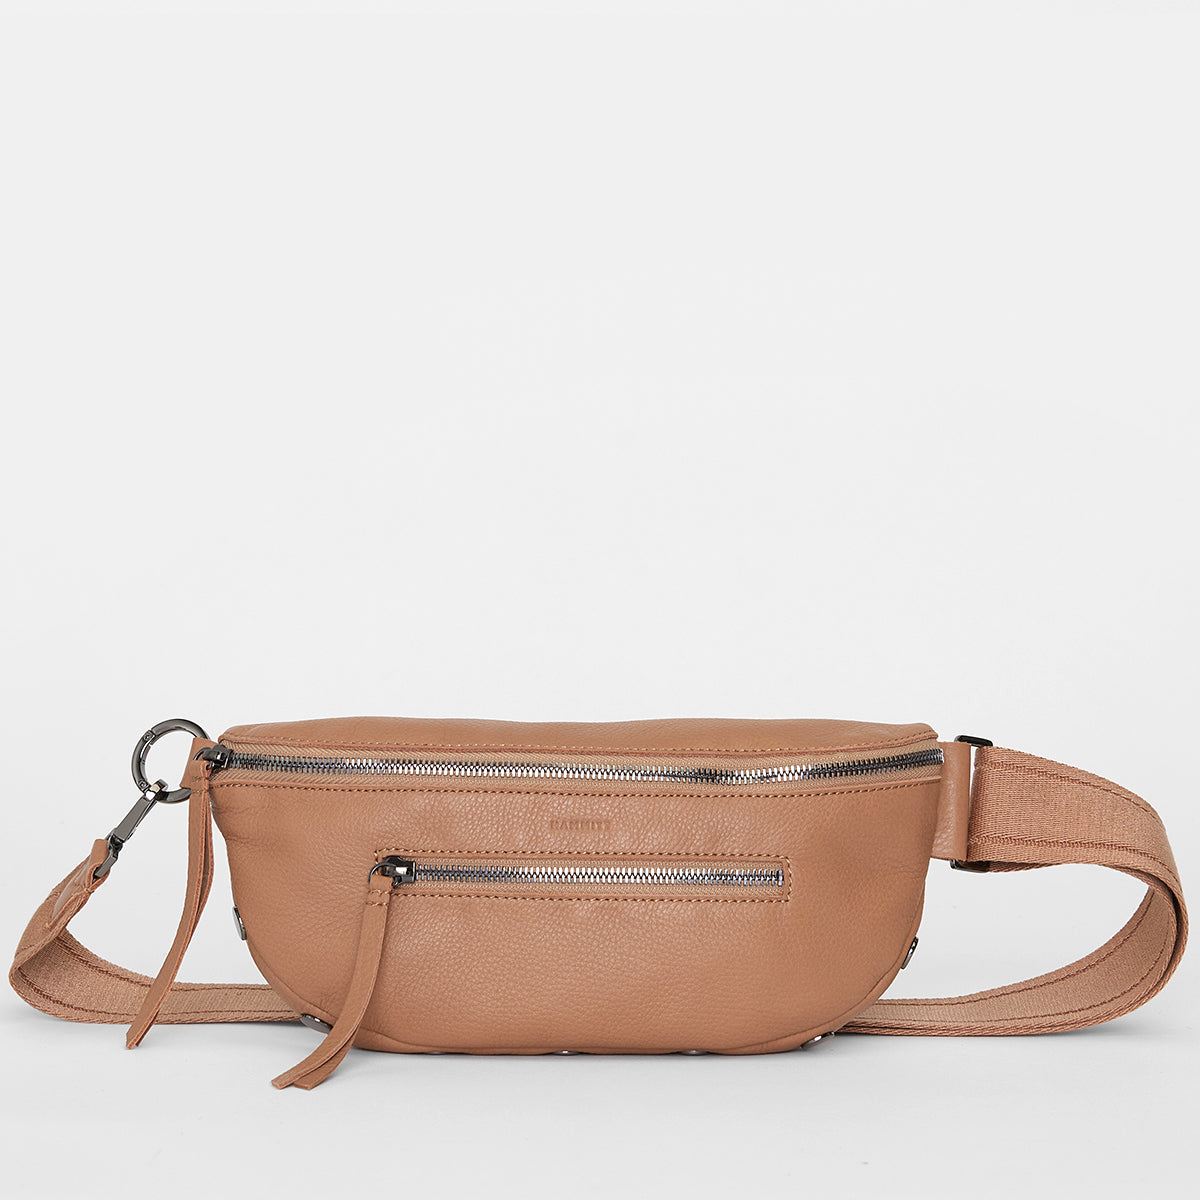 Charles-Crossbody-Biscotti-Front-View